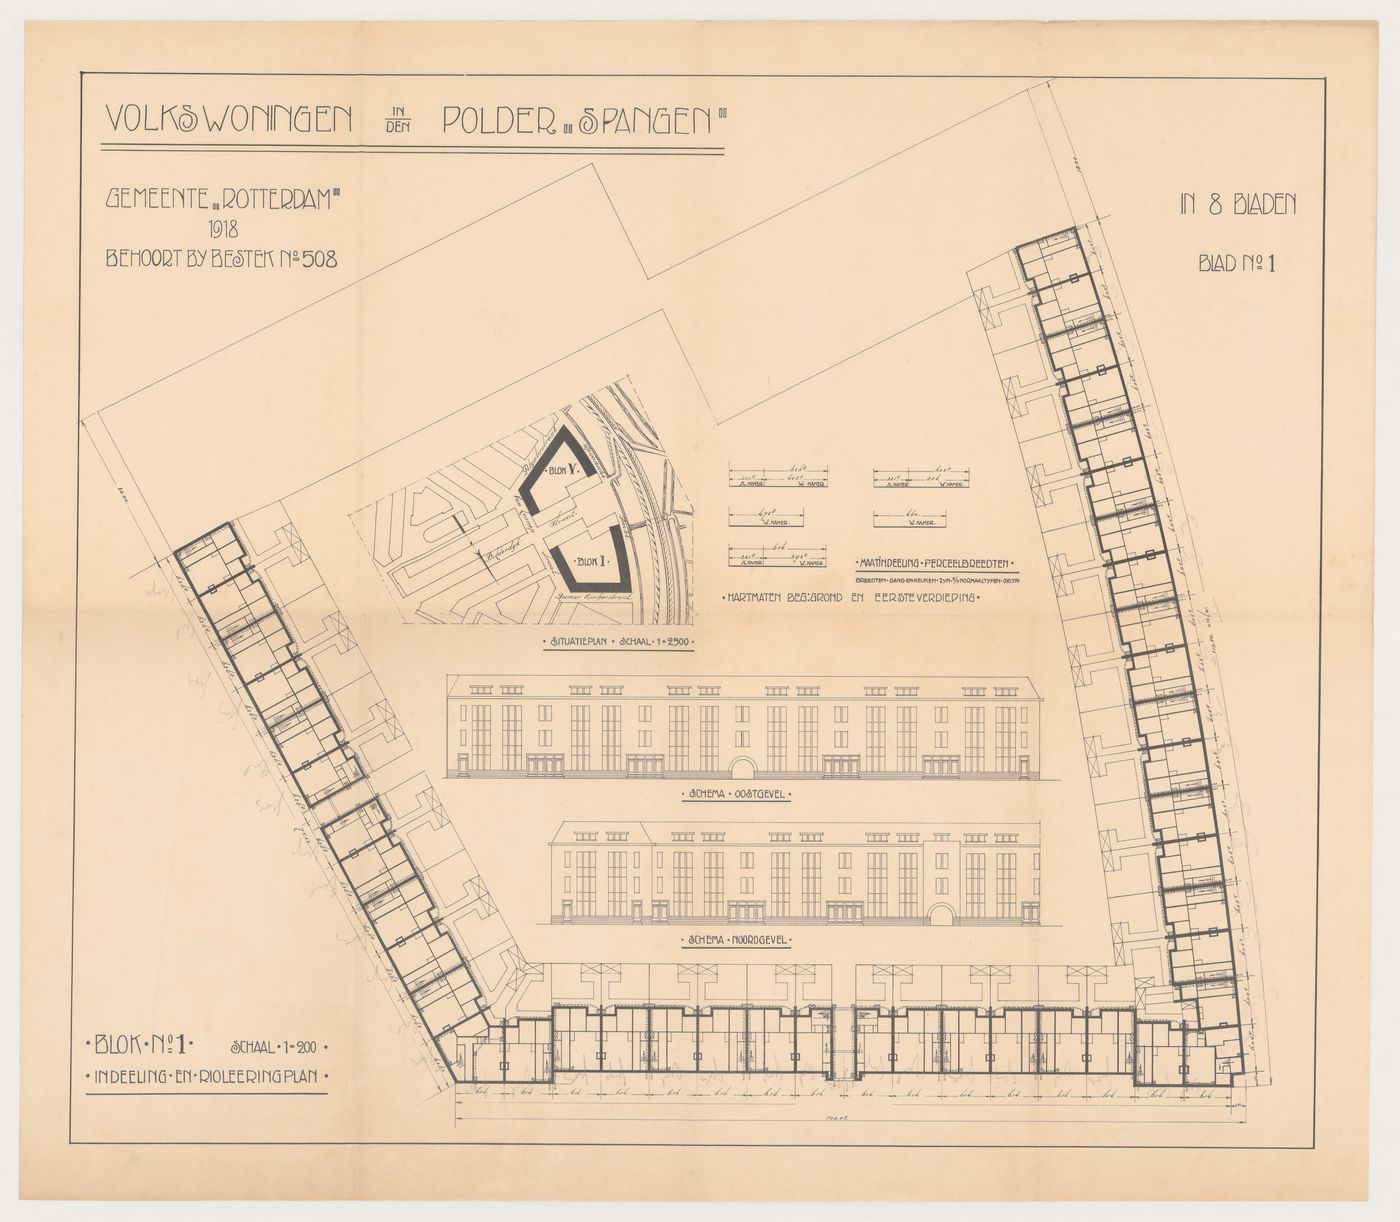 Site plan for Blocks 1 and 5, and ground floor plan and elevations for Block 1, Spangen Housing Estate, Rotterdam, Netherlands